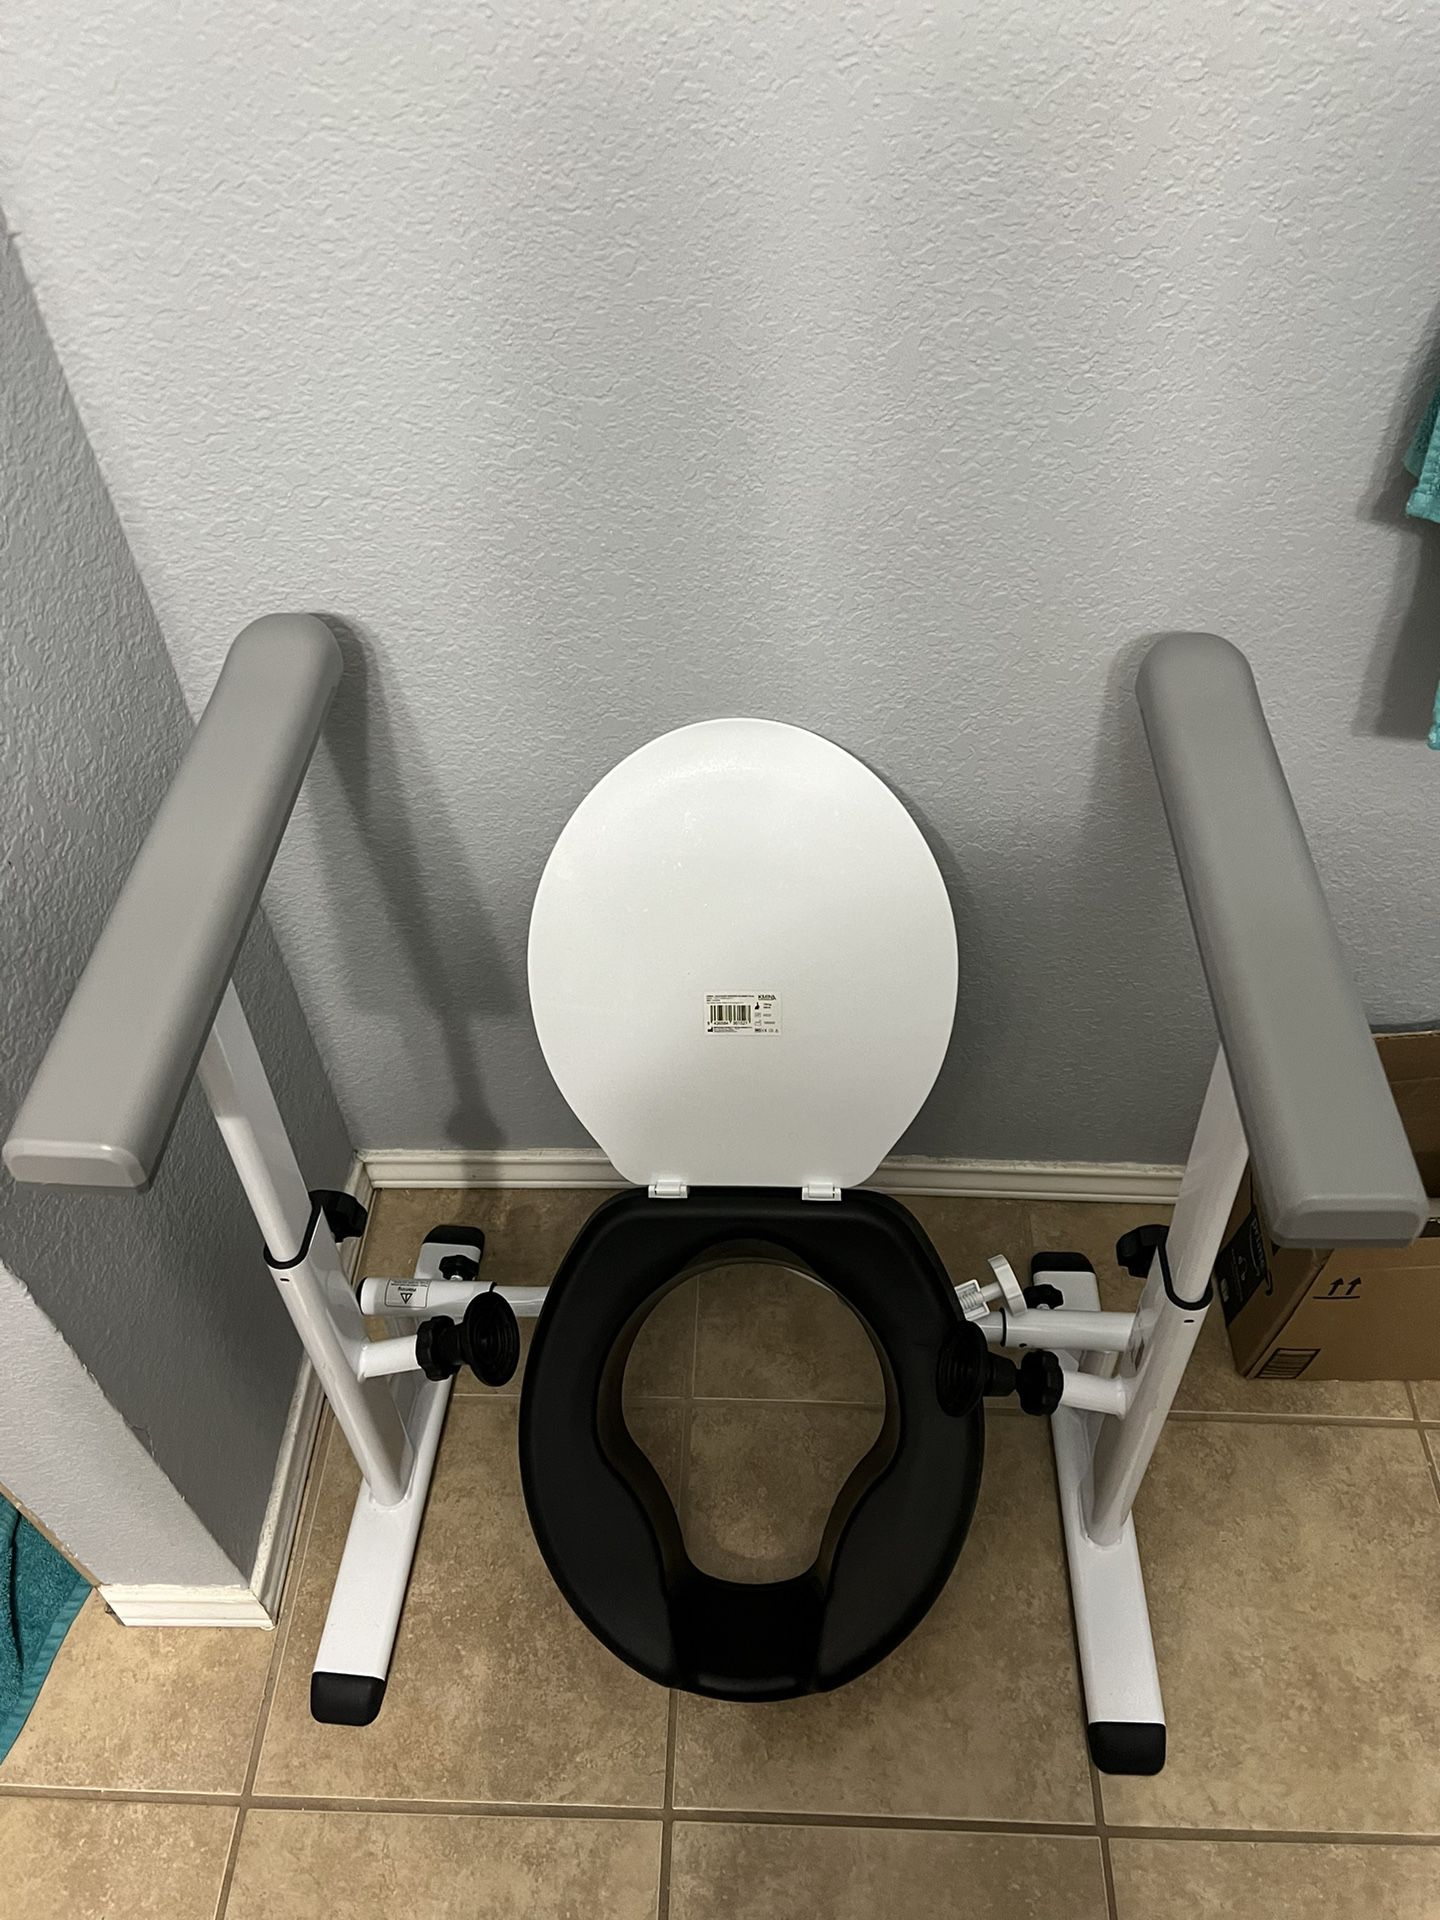 Race toilet seat With Rails 